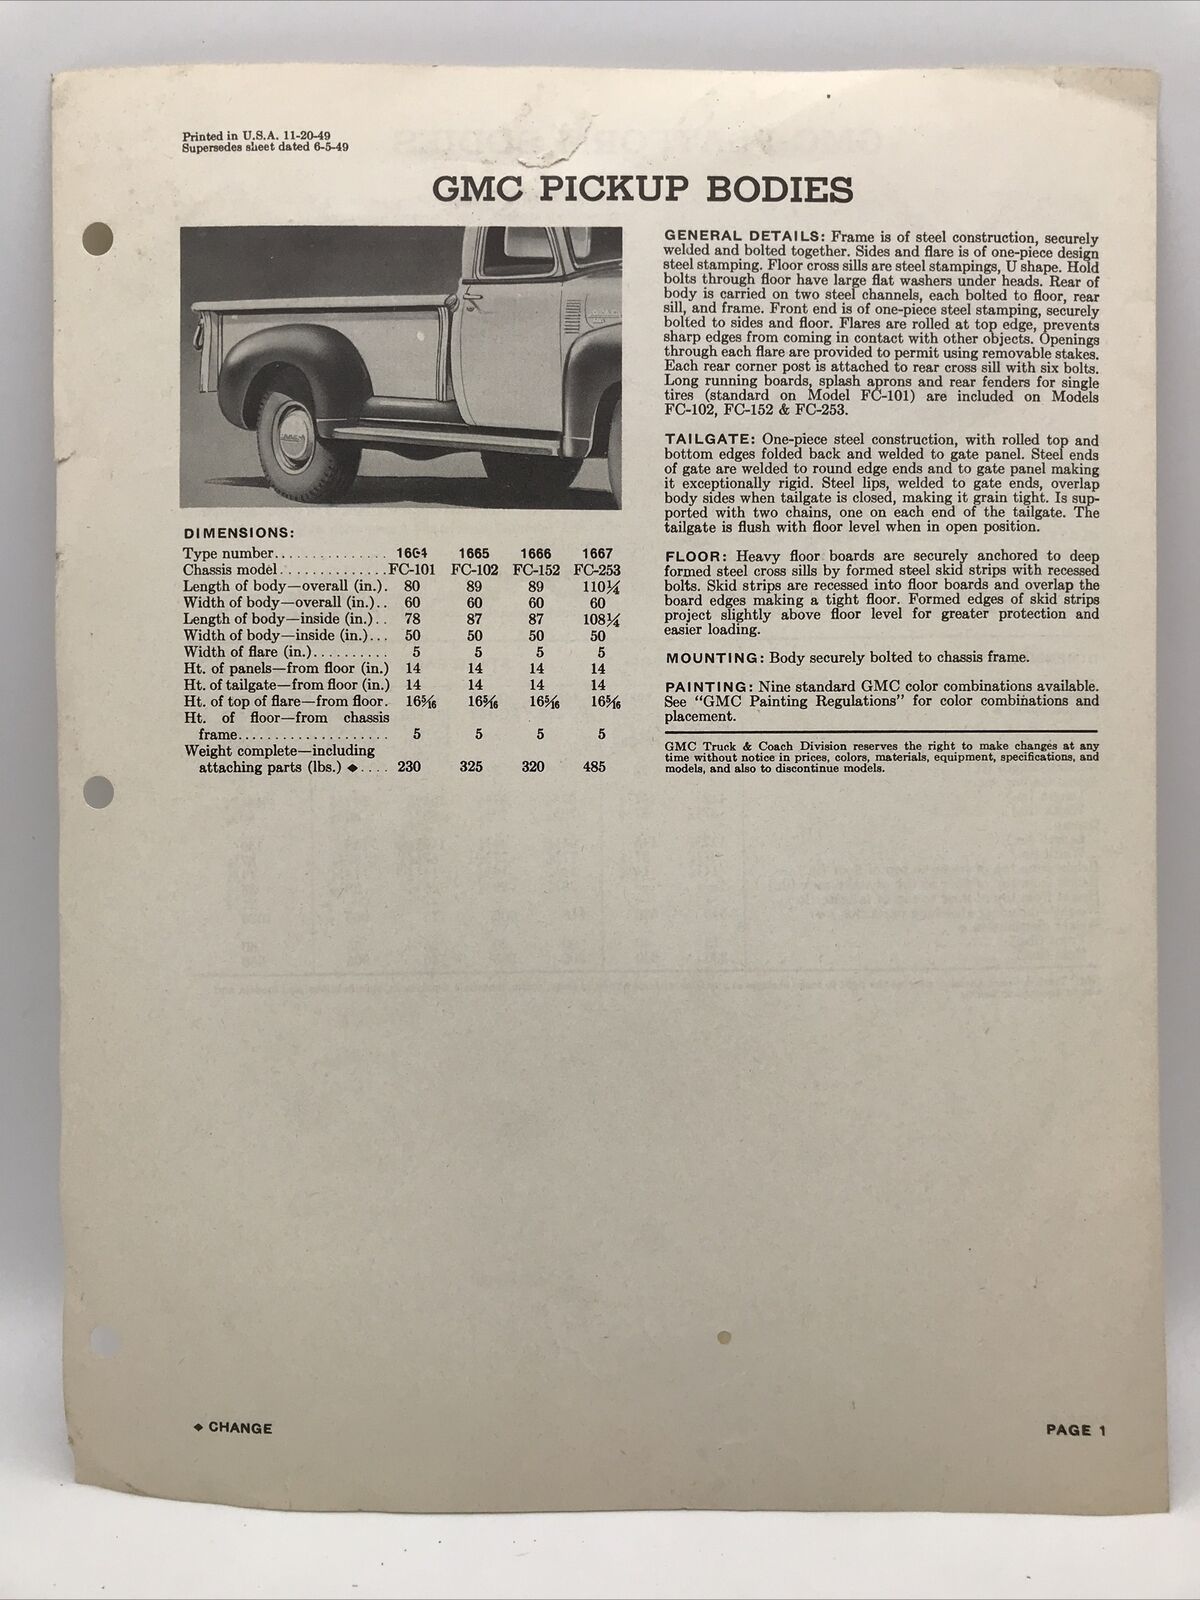 1949 Gmc Pickup Truck Bodies Dimensions Platform Stake Rack Specifications